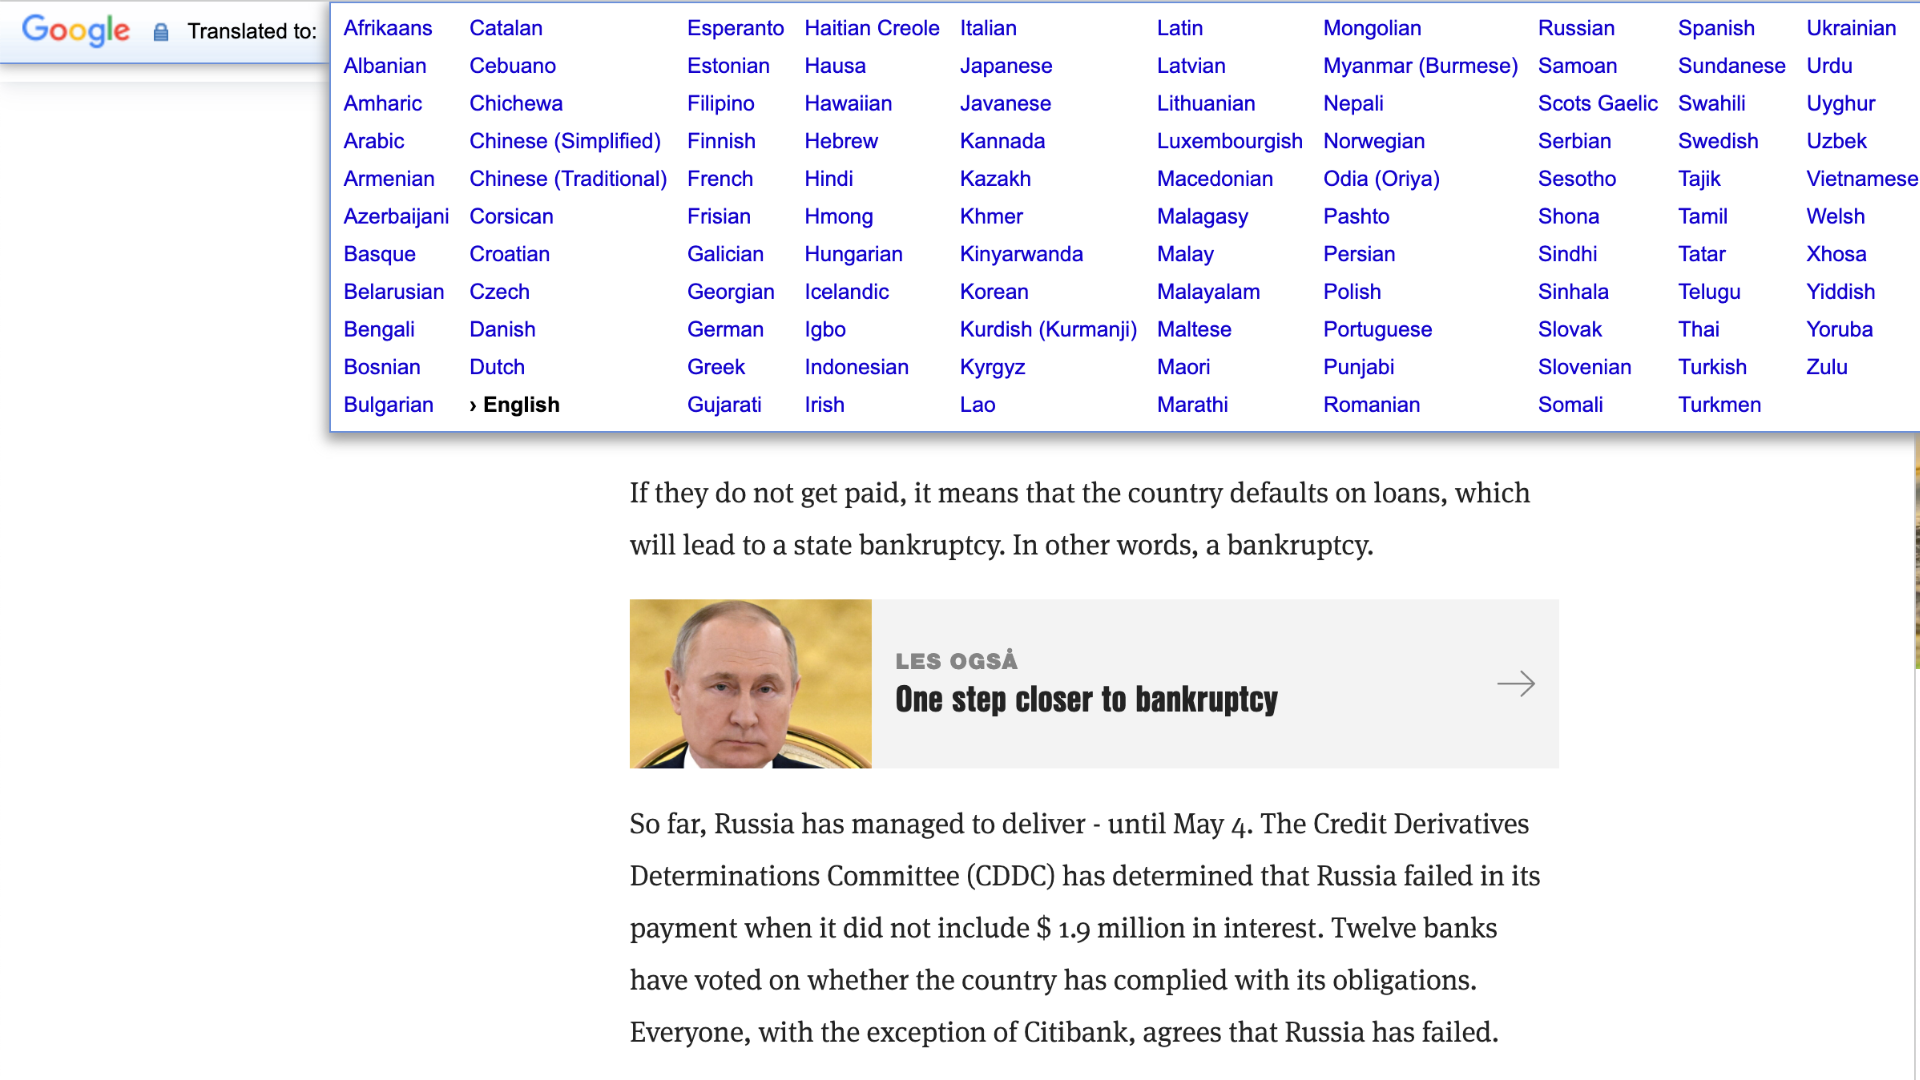 Screenshot of the extension with all the languages listed.